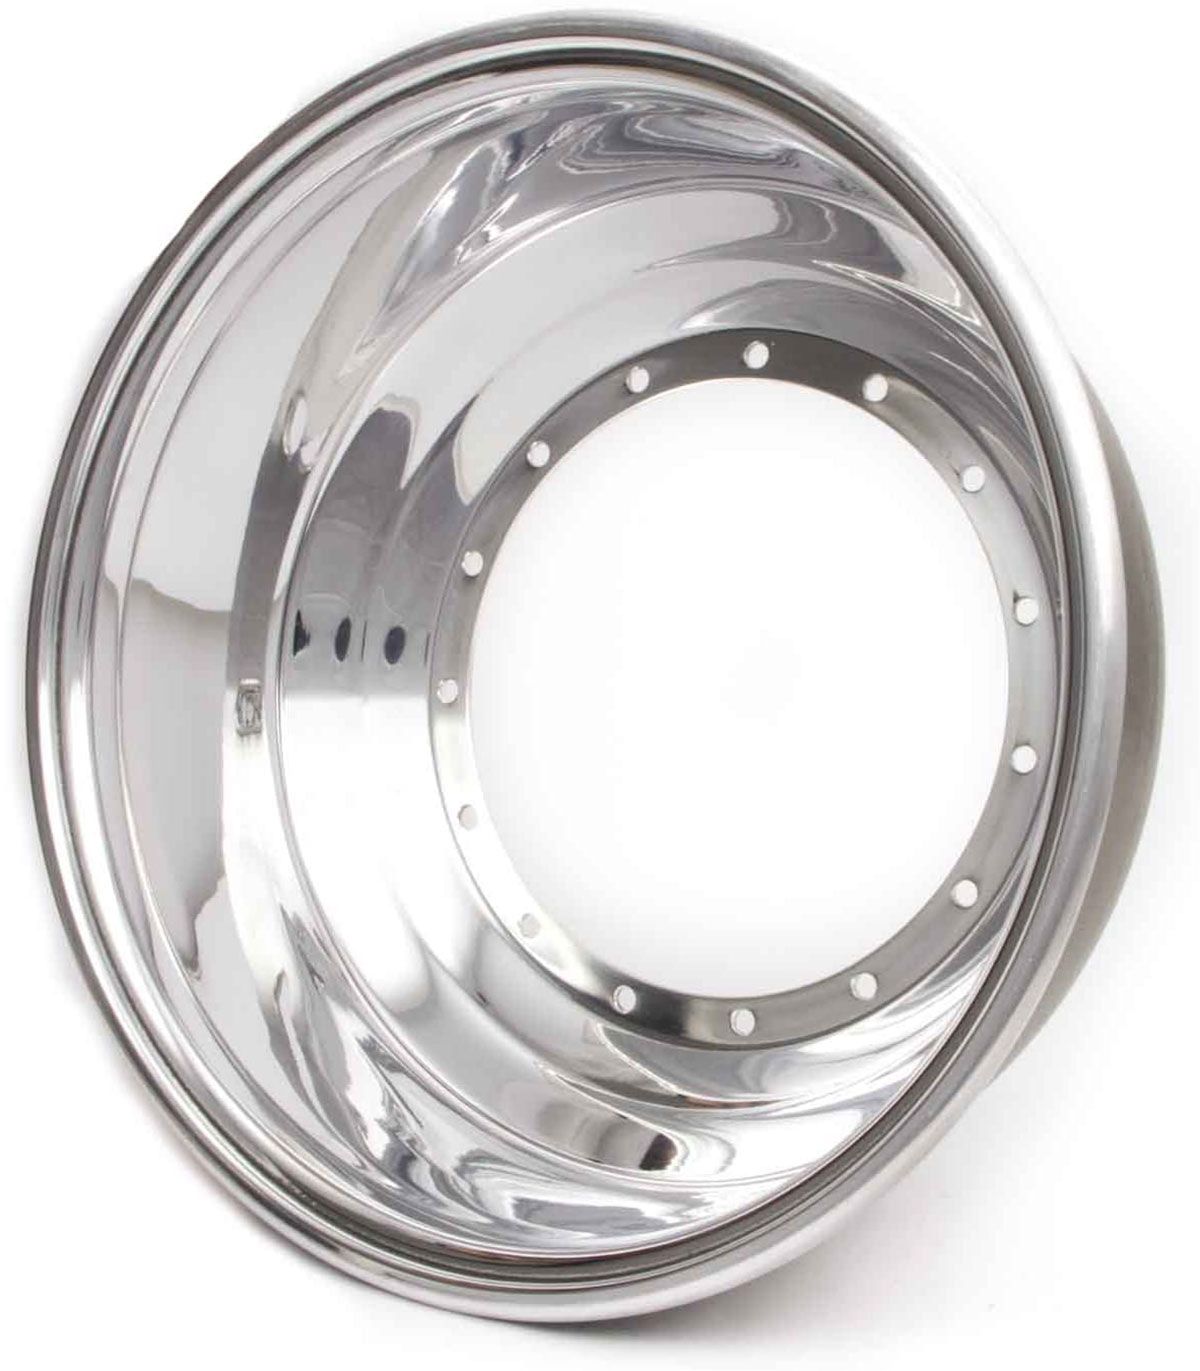 WEP858-5014 - SPRINT 15 X 10.25" OUTER HALF